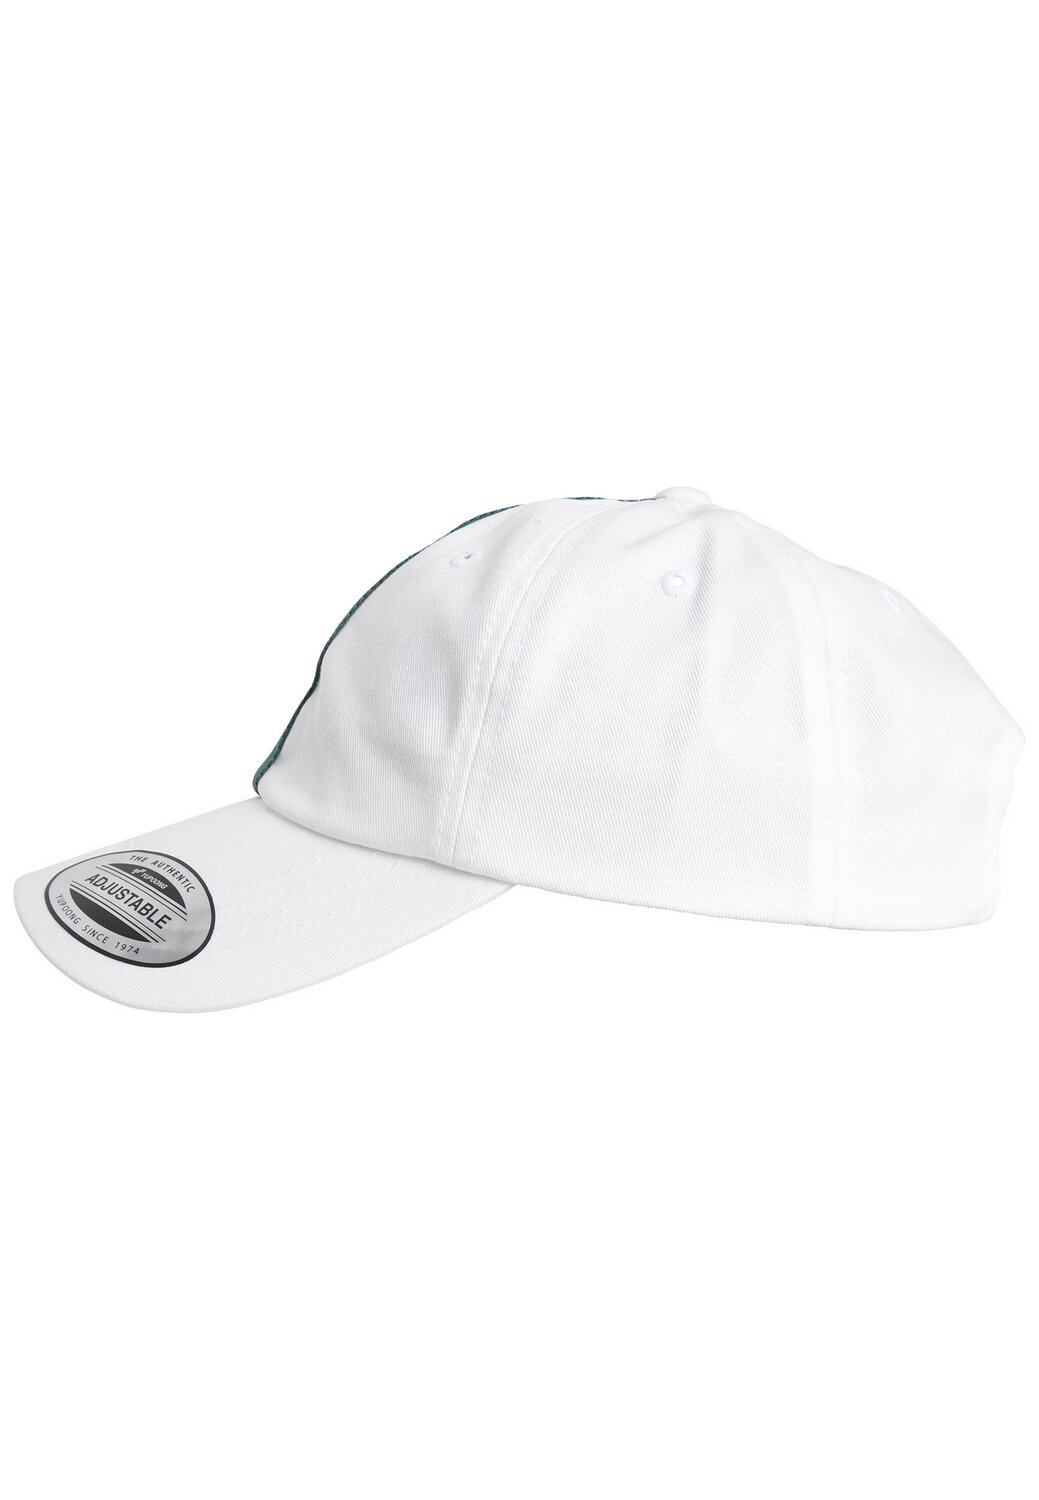 Stripe MAXISCOOT Hat Dad | red/green white/fire Flexfit